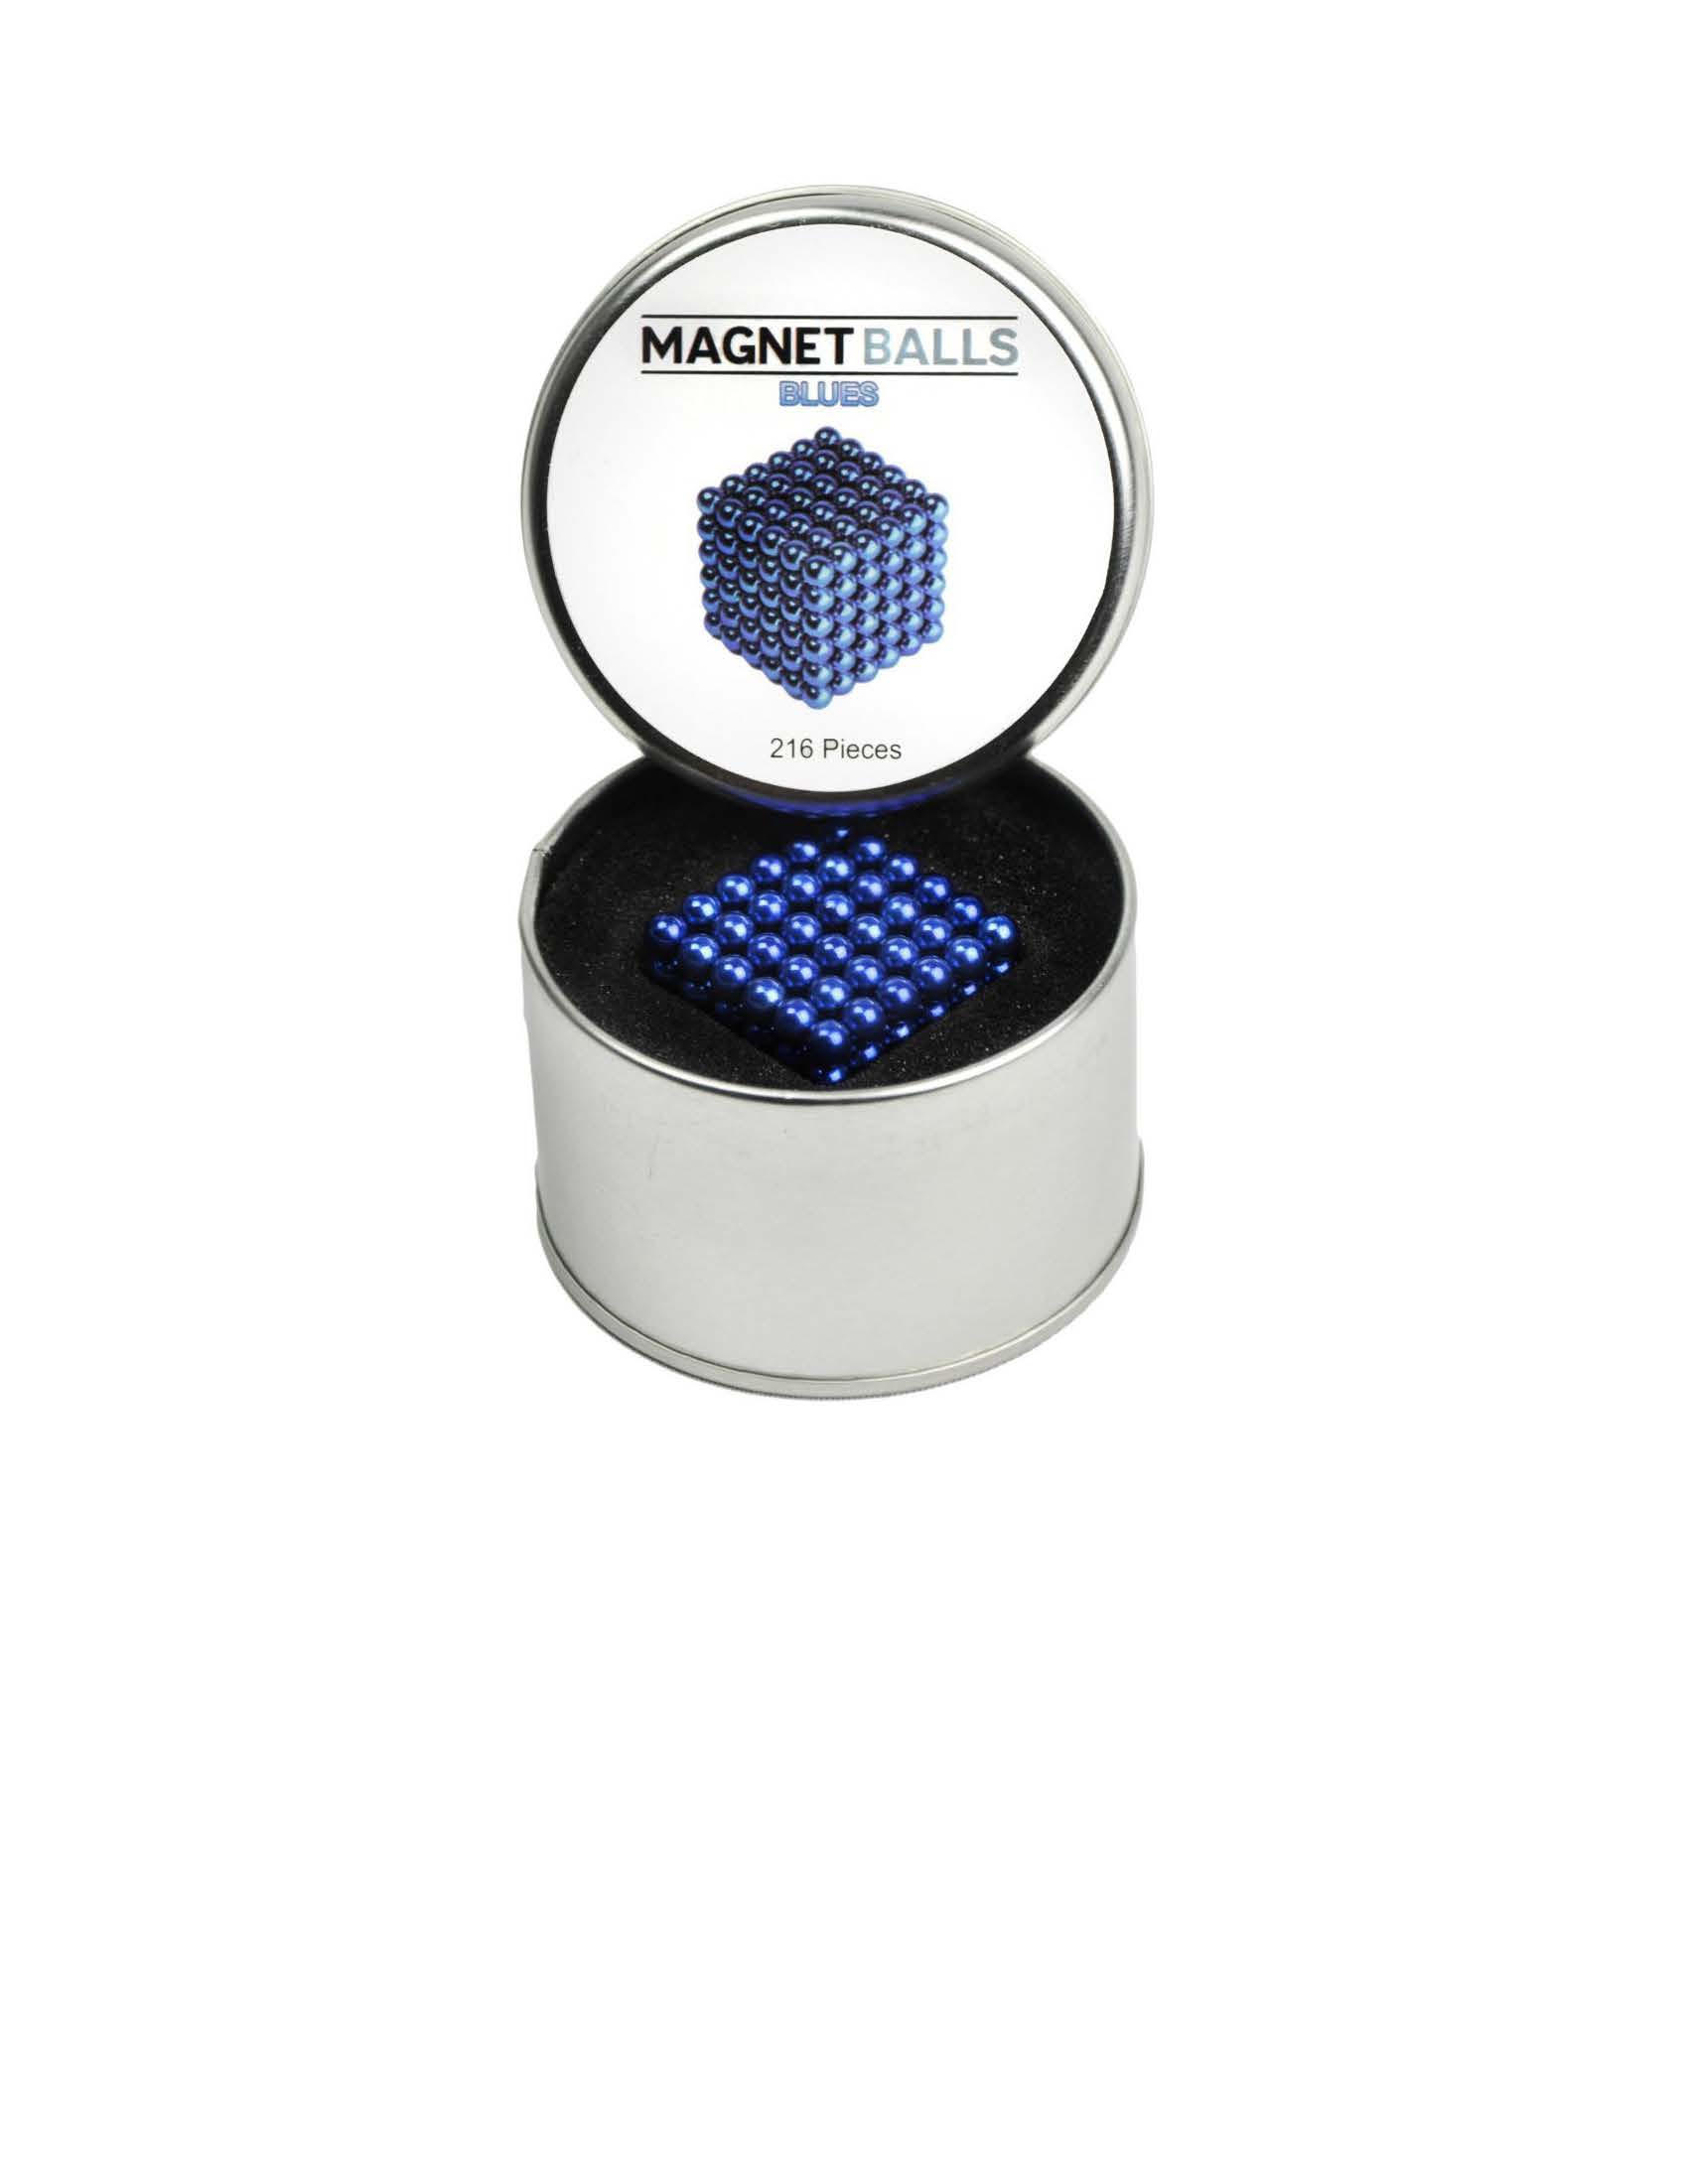 High Magnet Balls Recalled by SCS Direct Due to Risk of Ingestion; Sold Exclusively on Amazon.com | CPSC.gov